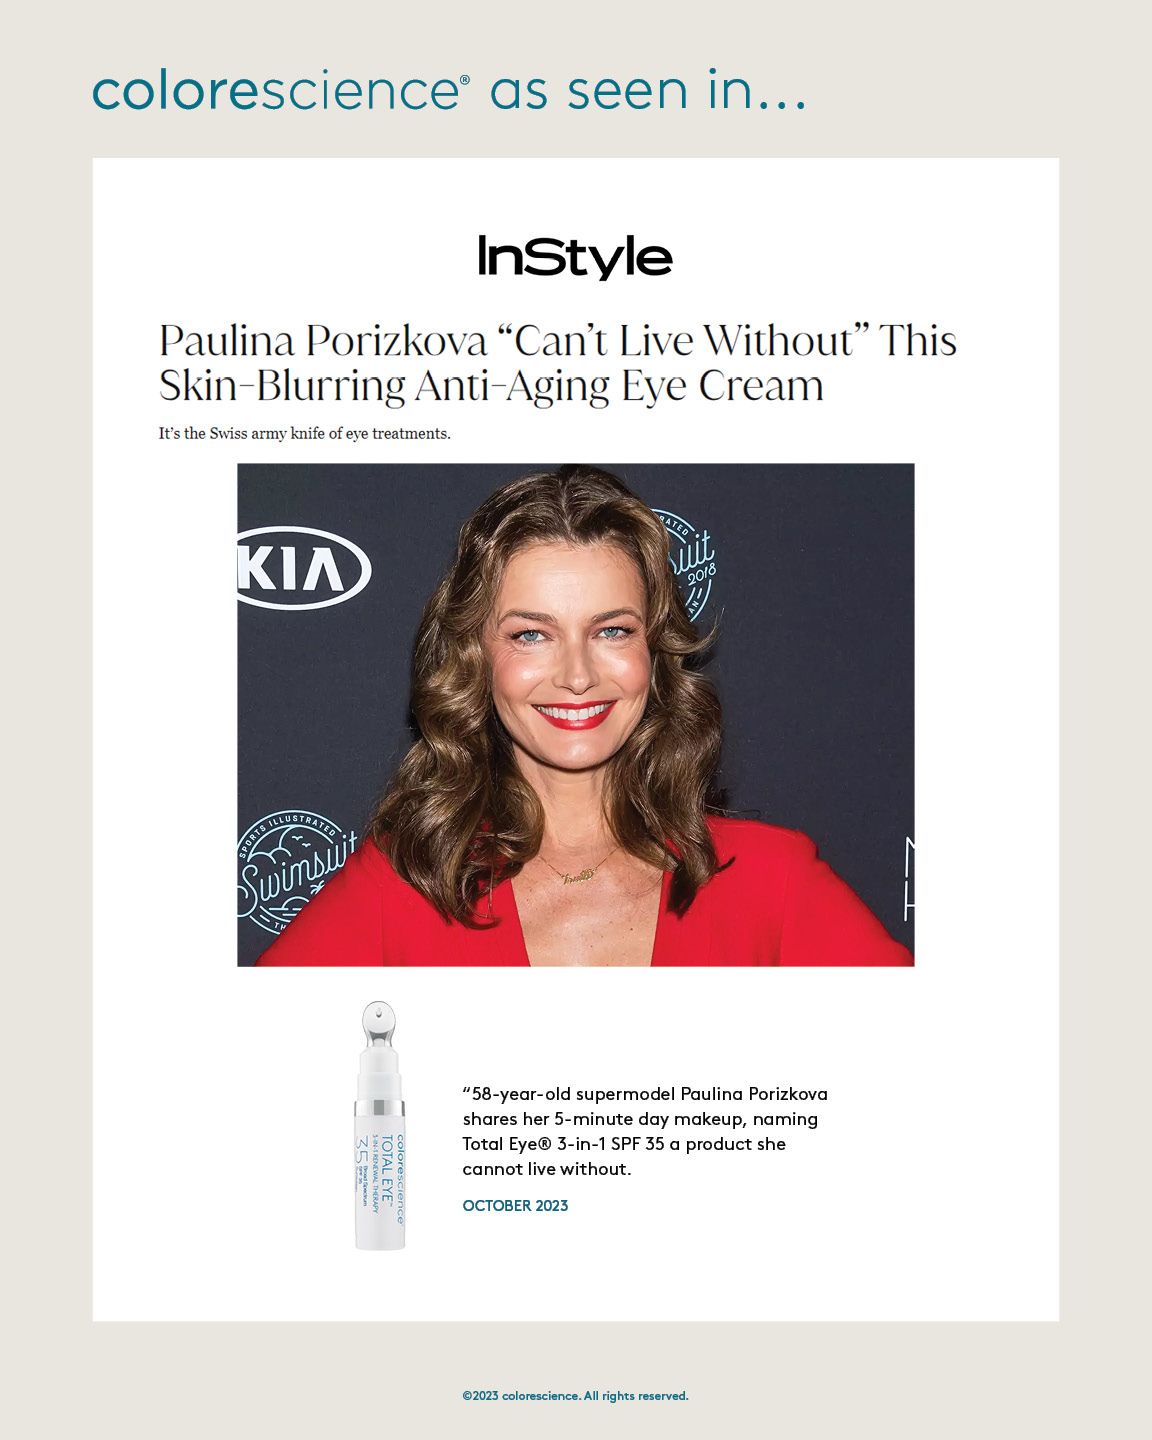 Paulina Porizkova "Can't Live Without" This Anti-Aging Eye Cream